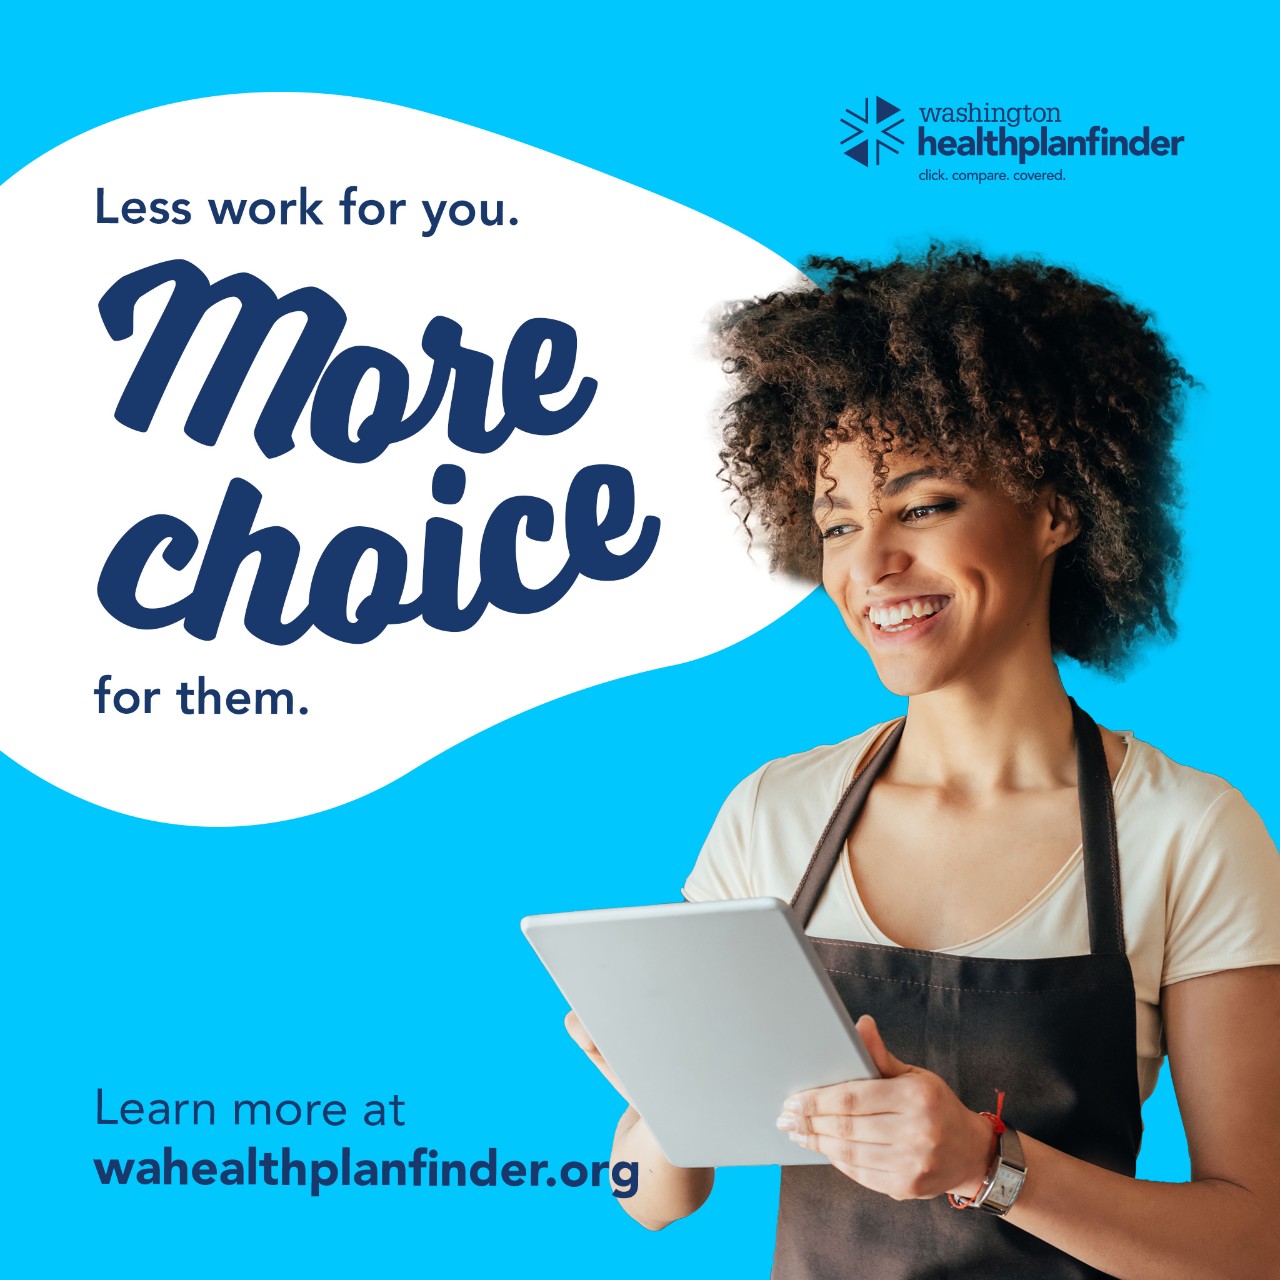 Less work for you. More choice for them. Learn more at wahealthplanfinder.org.